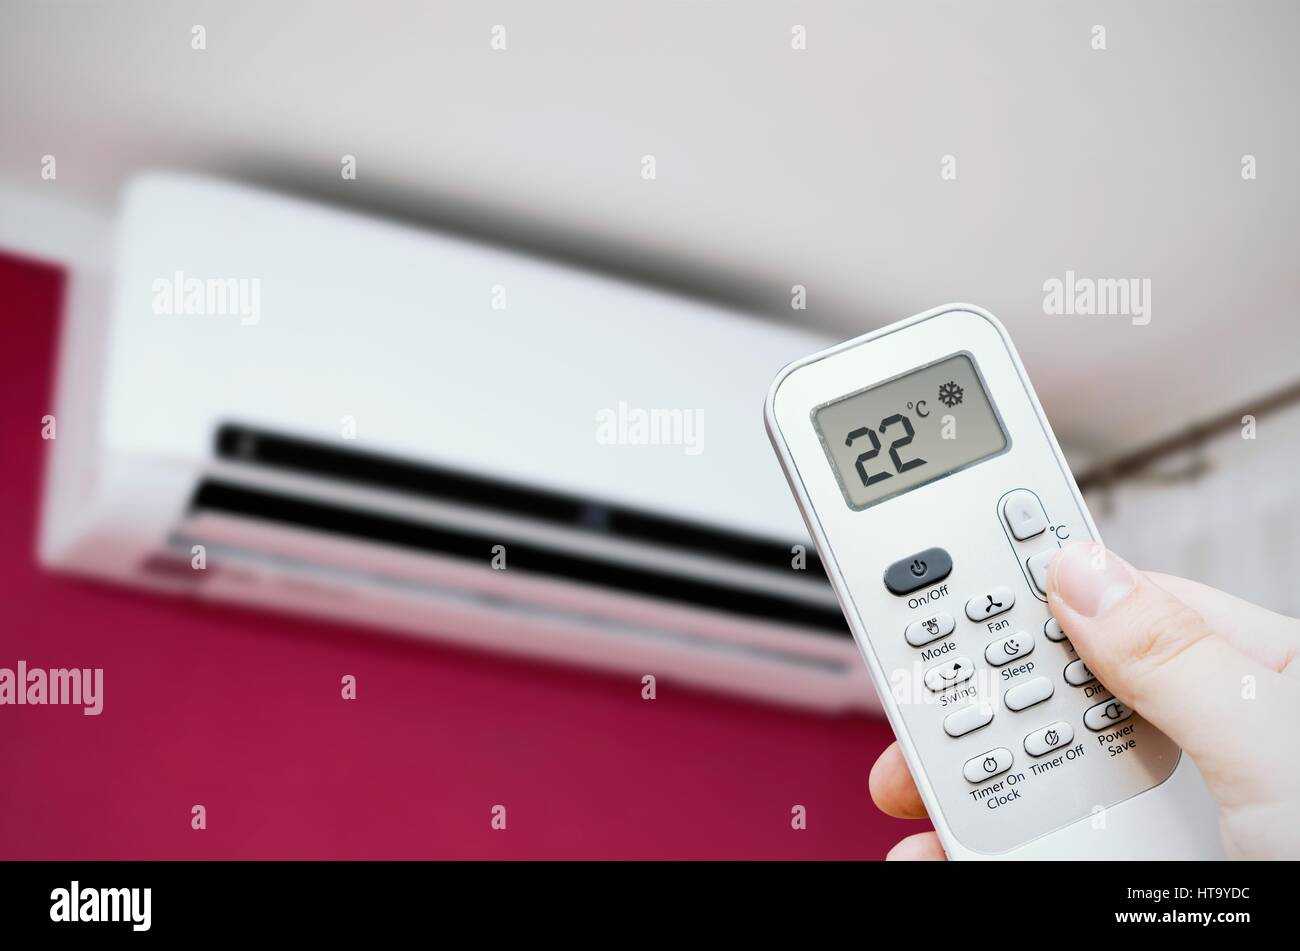 Air conditioner split on the wall. Hand holding remote control Stock Photo